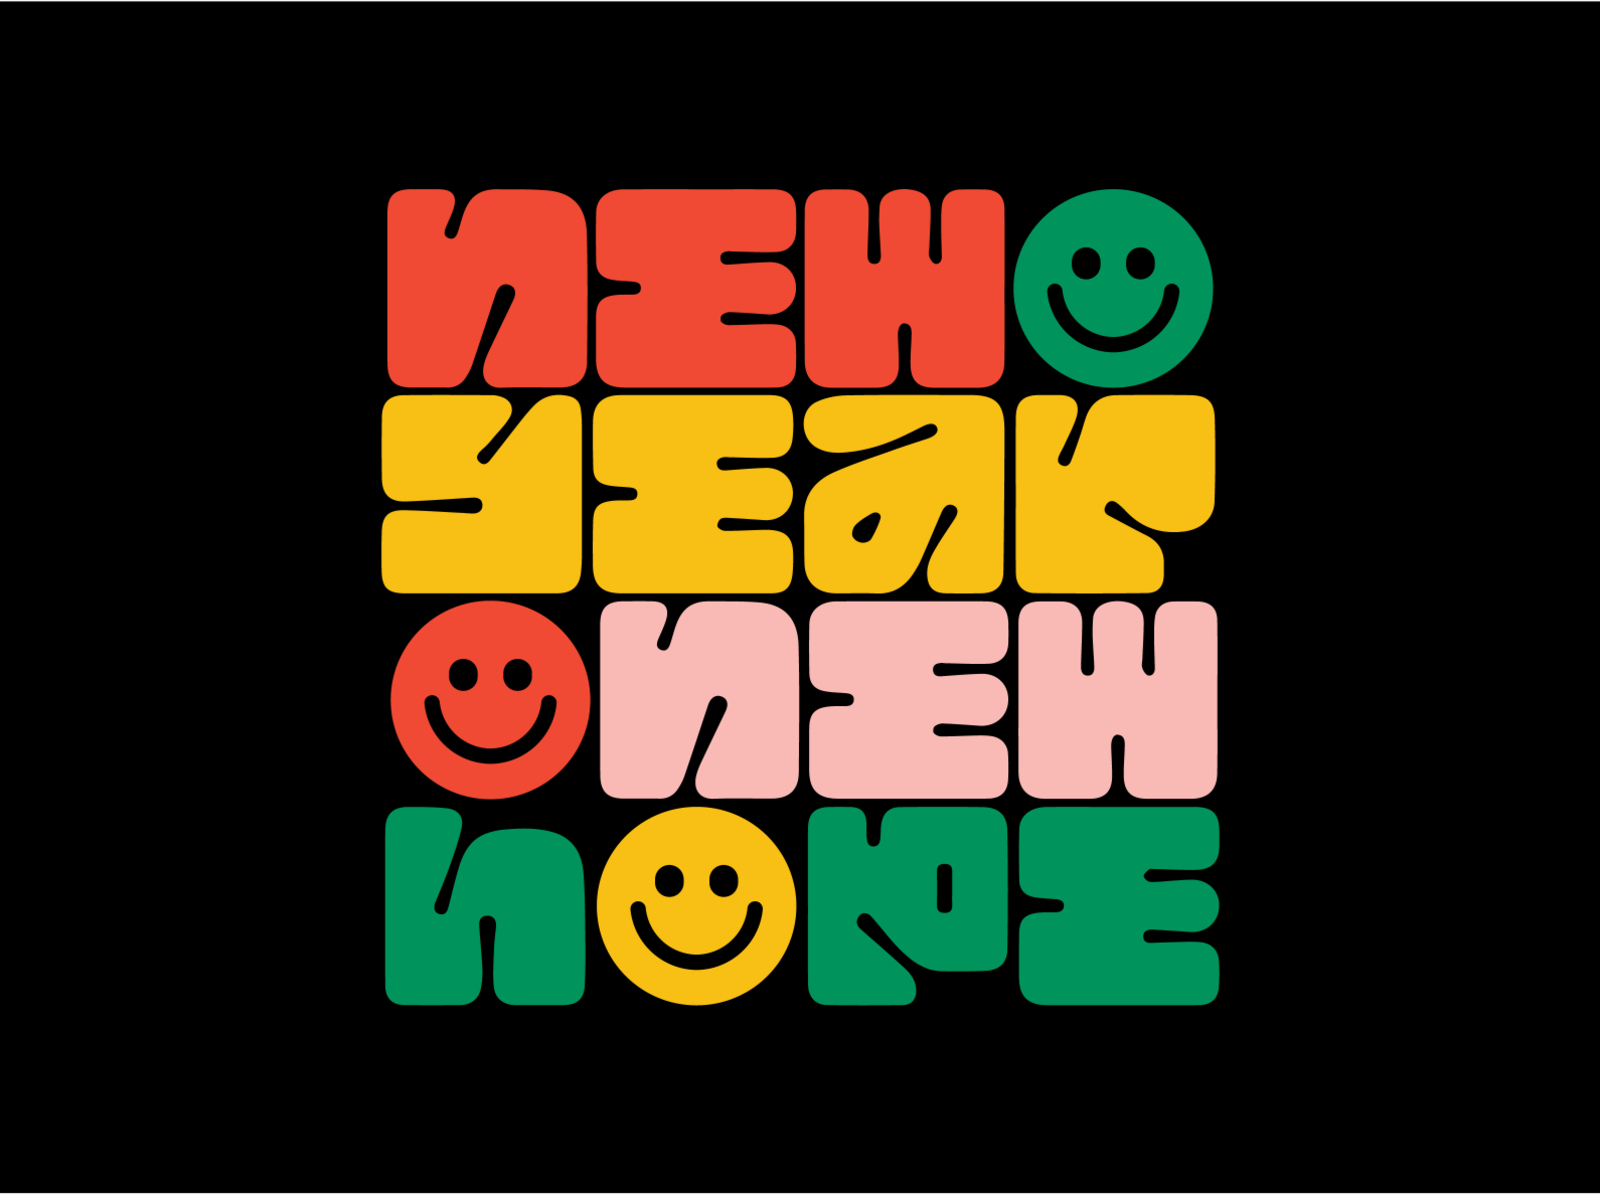 2021 2020 2021 cute design fun icon illustration new year new years eve smile type typography vector